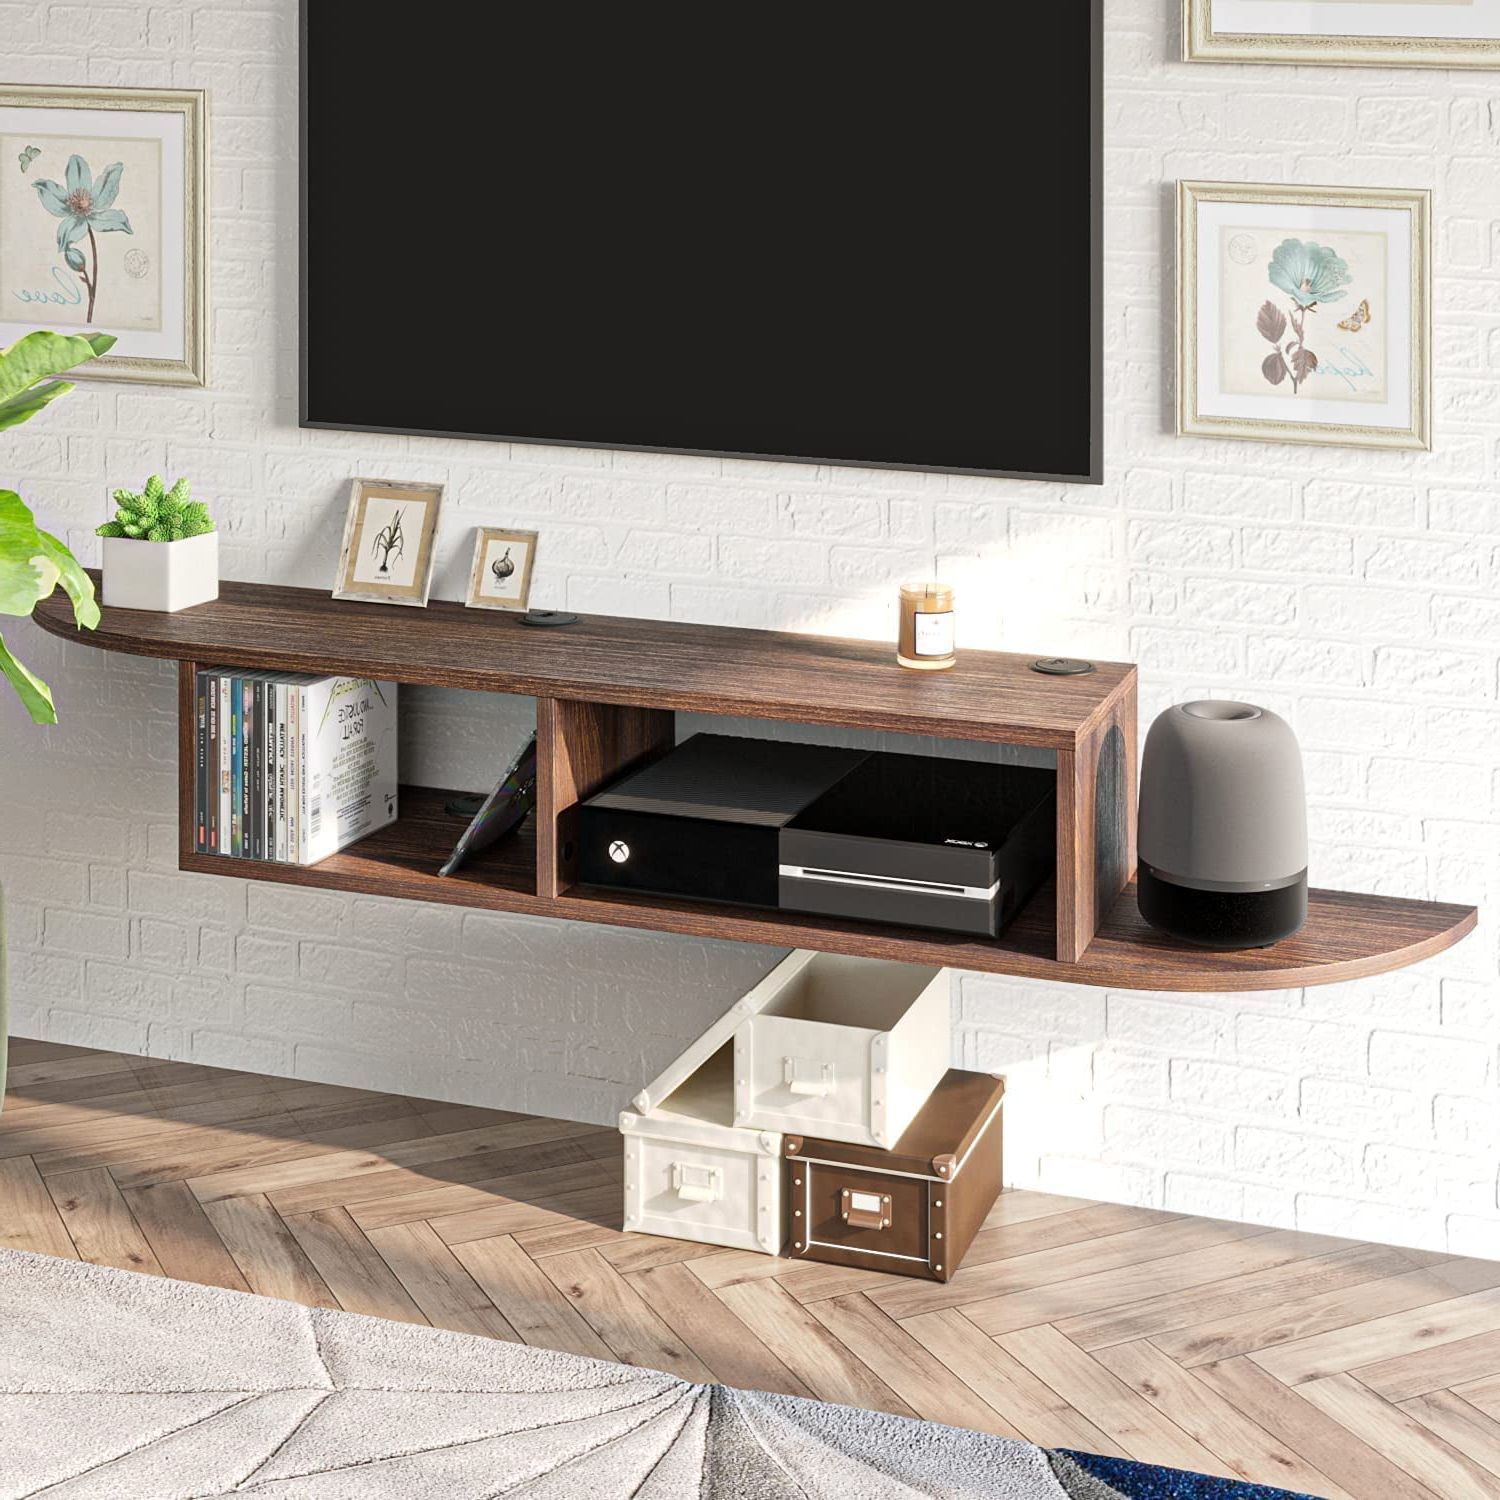 Floating Tv Stand, White Floating Tv Shelf, Wall Mounted Media Console  Entertainment Center For 55 Inch Tv, Storage Cabinet Under Tv, Walnut –  Walmart Intended For Wall Mounted Floating Tv Stands (Gallery 14 of 20)